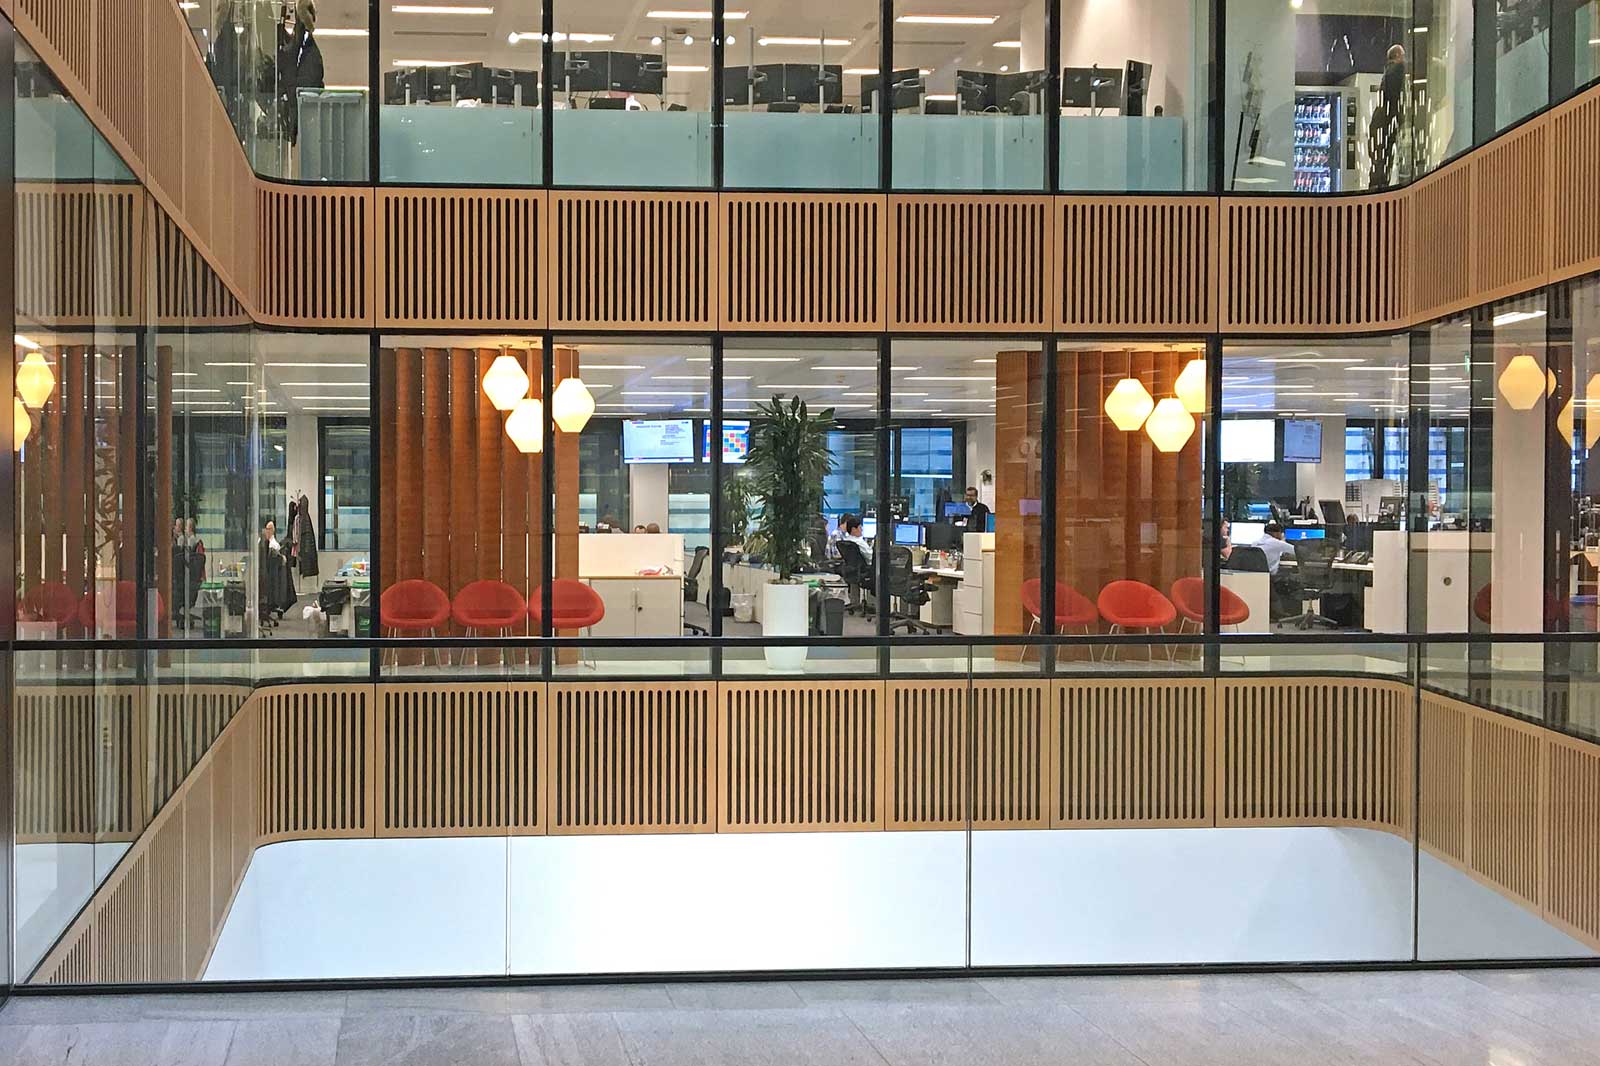 RWE office in London - view inside offices